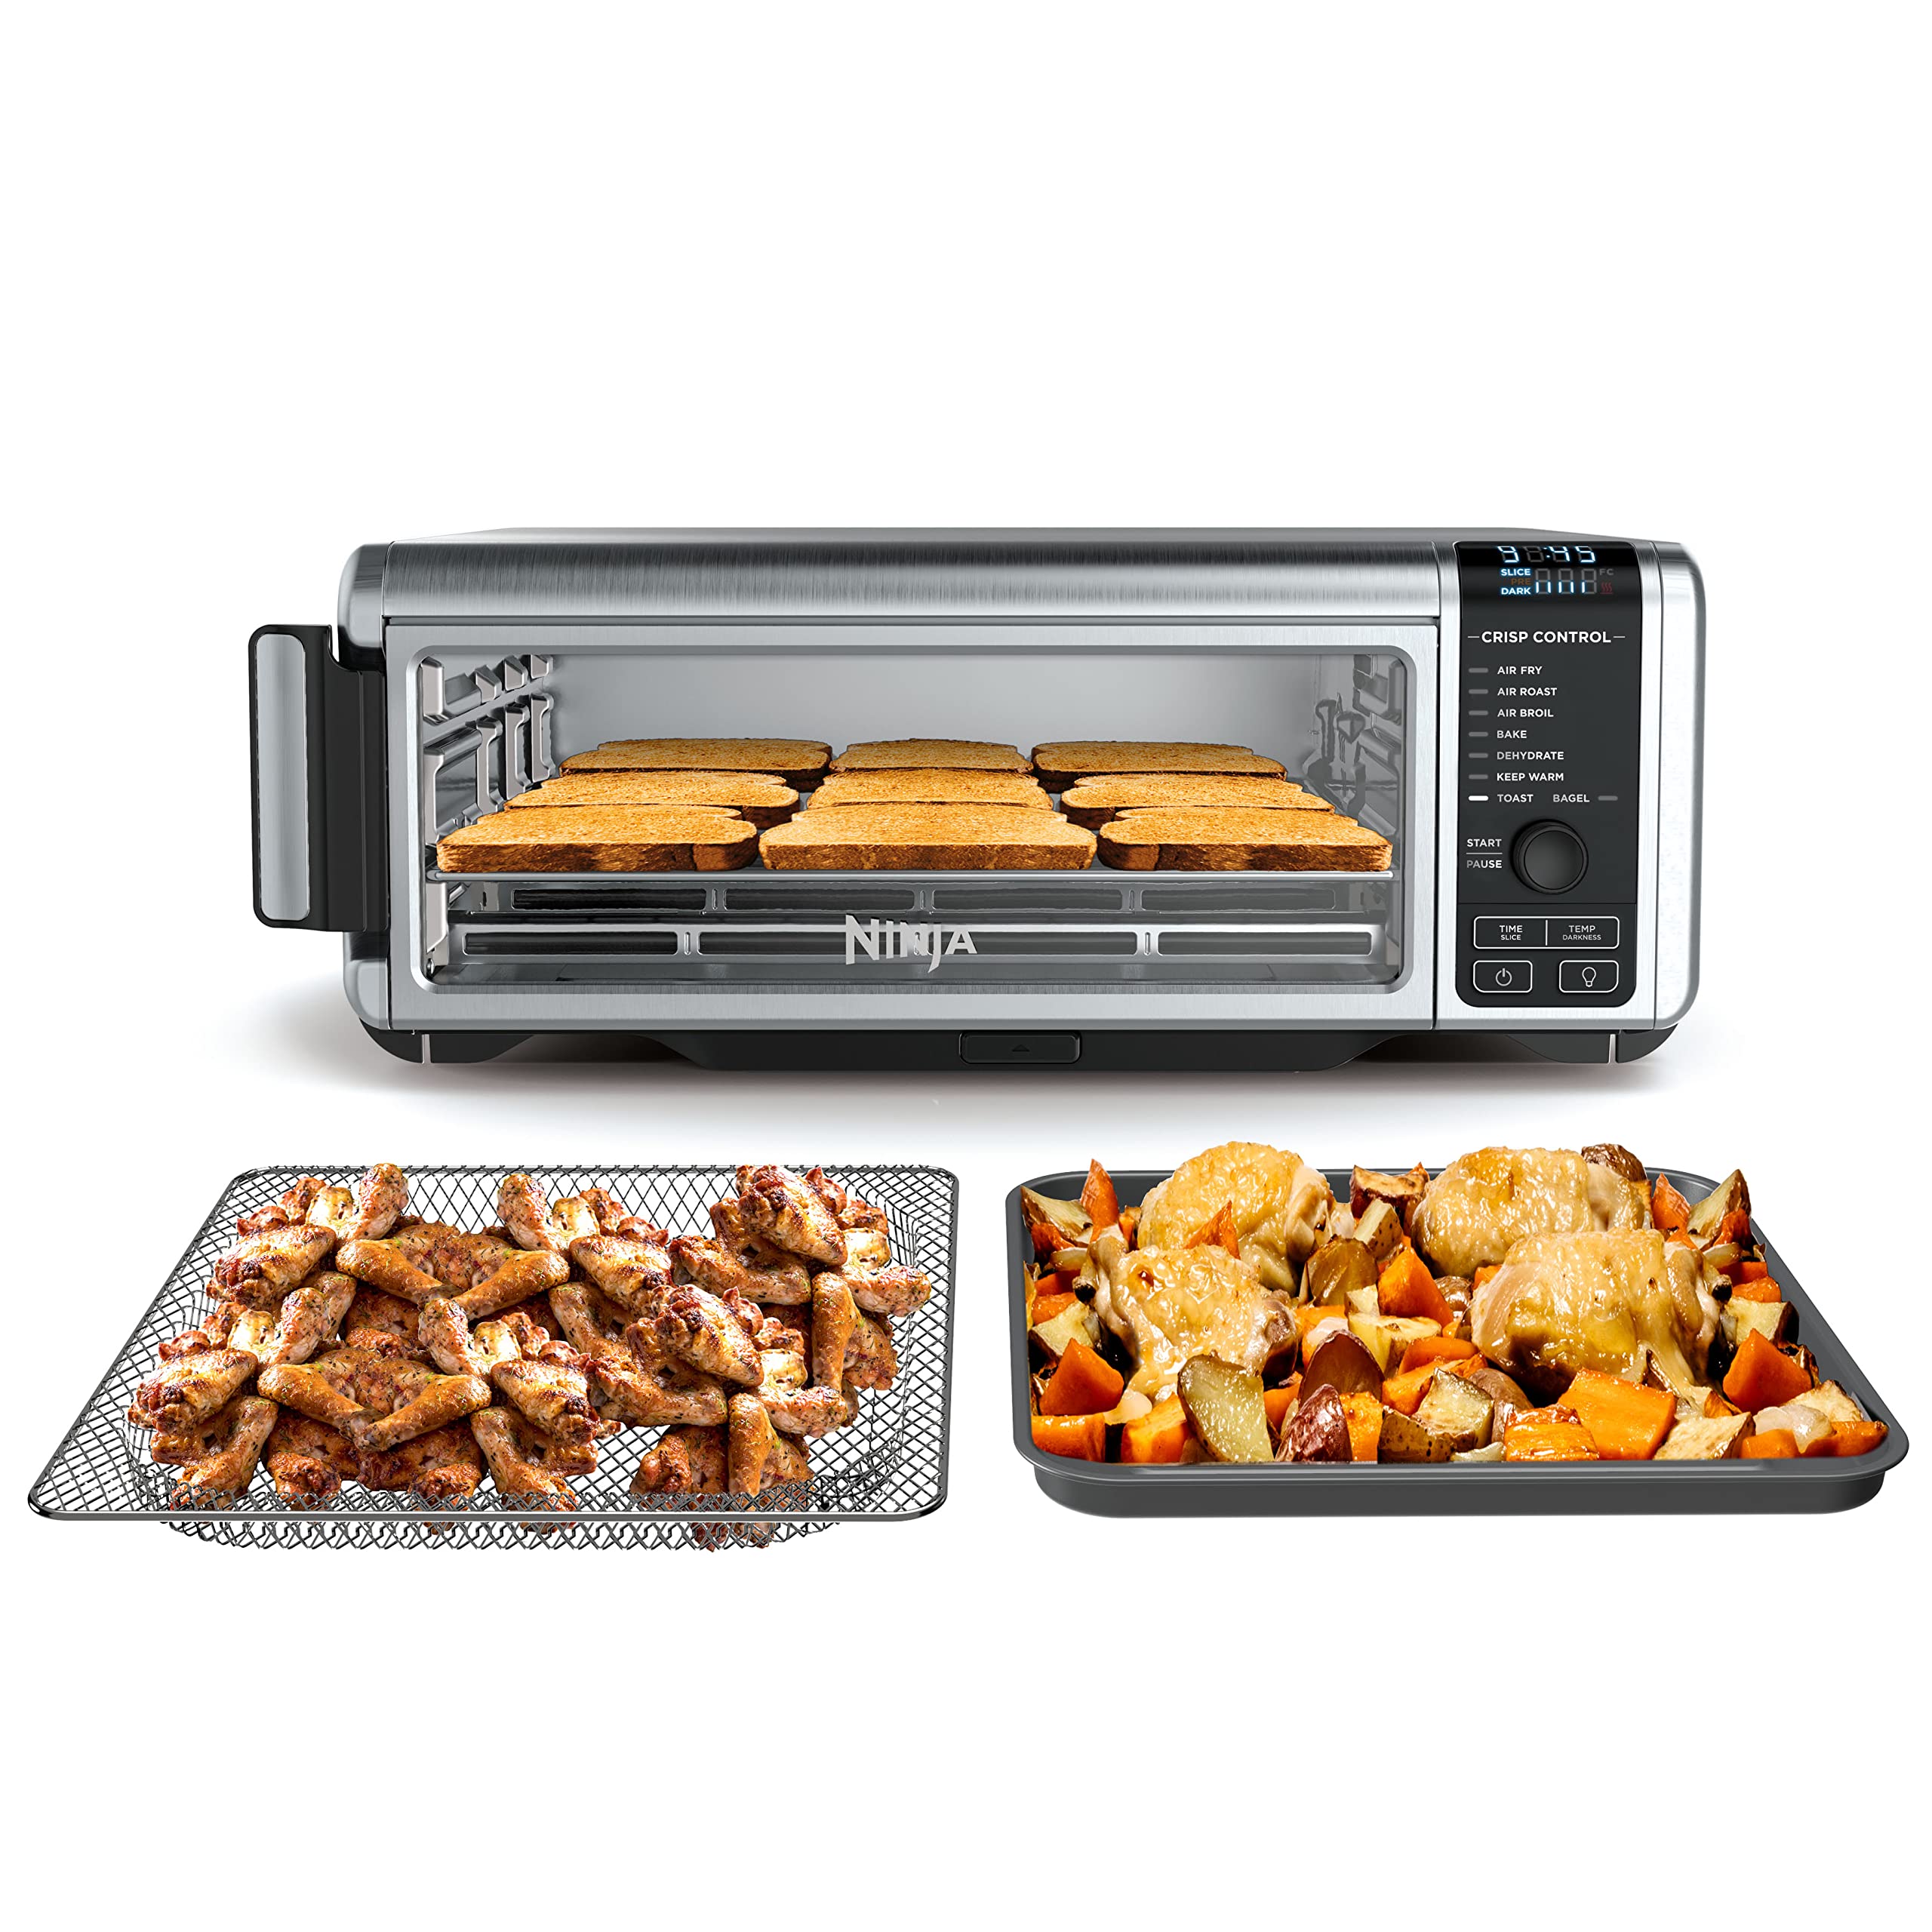 Ninja SP101 Digital Air Fry Countertop Oven with 8-in-1 Functionality, Flip Up & Away Capability for Storage Space, with Air Fry Basket, Wire Rack & Crumb Tray, Silver $129.99